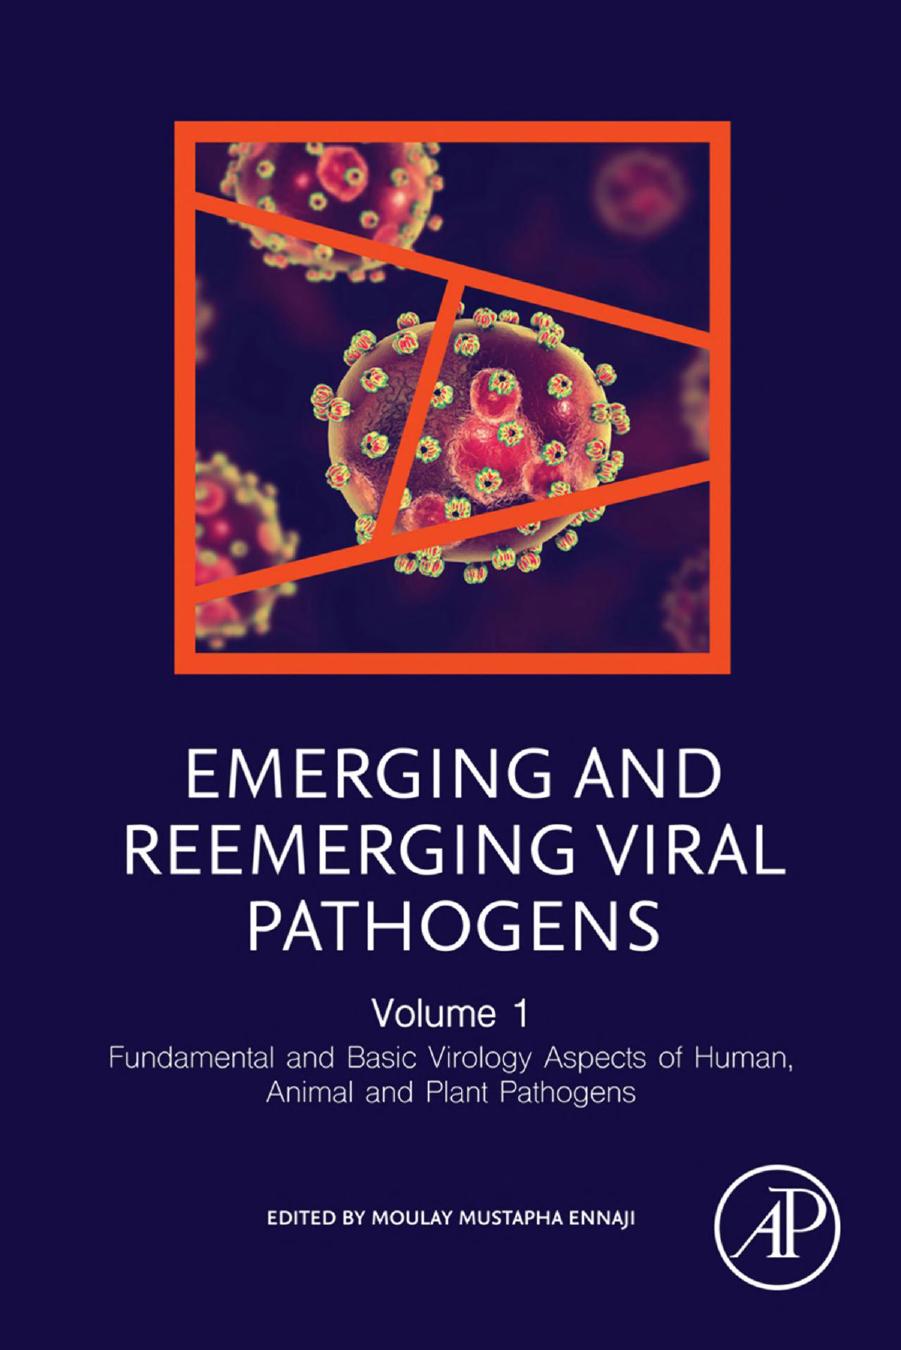 Emerging and Reemerging Viral Pathogens, Volume 1: Fundamental and Basic Virology Aspects of Human, Animal and Plant Pathogens